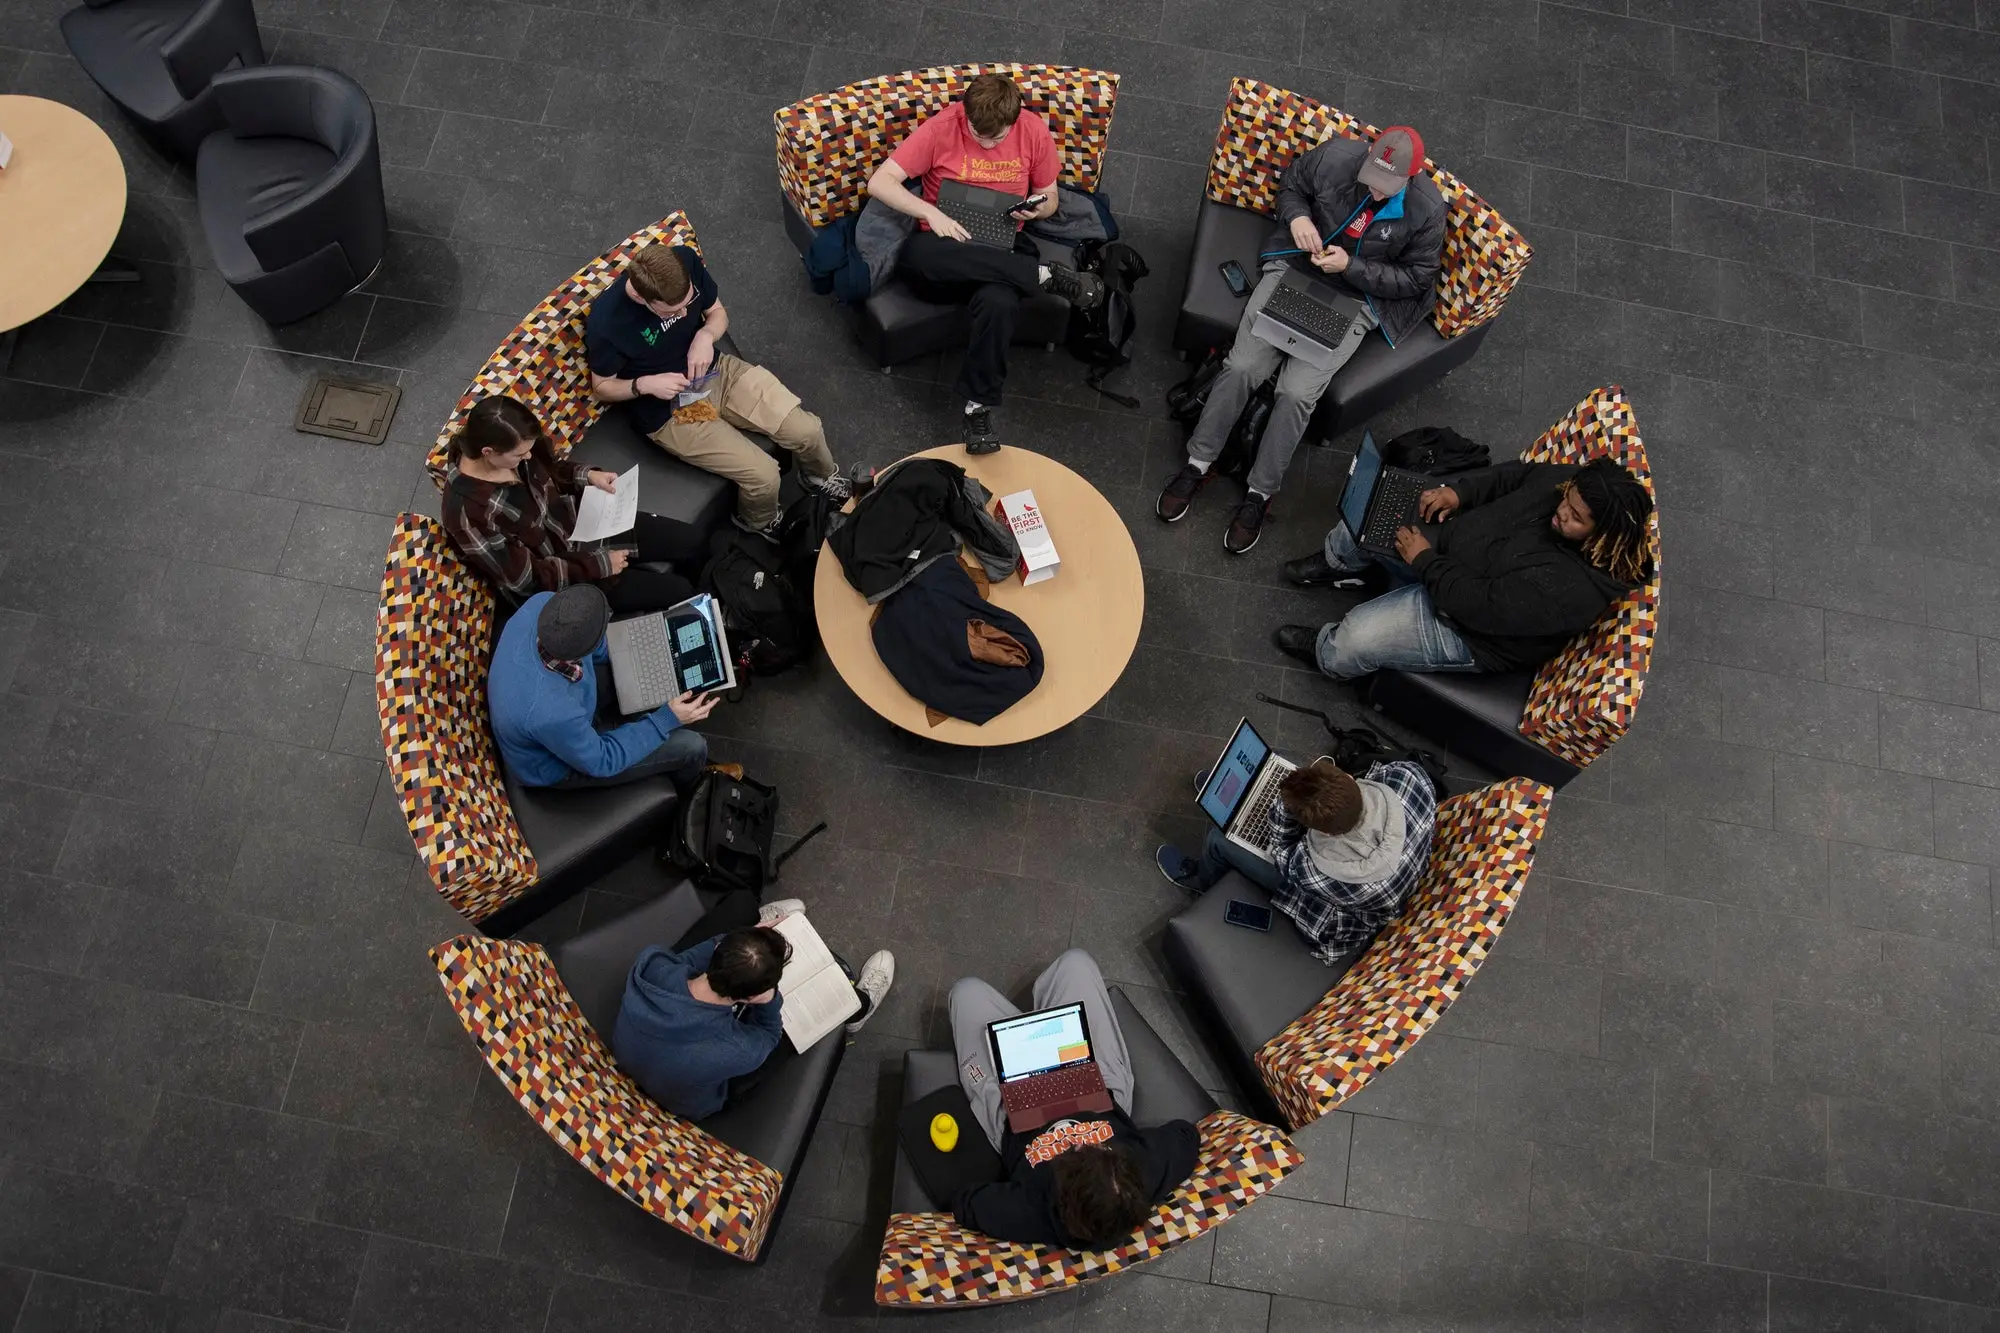 Students gathered in a circle in a common area. 